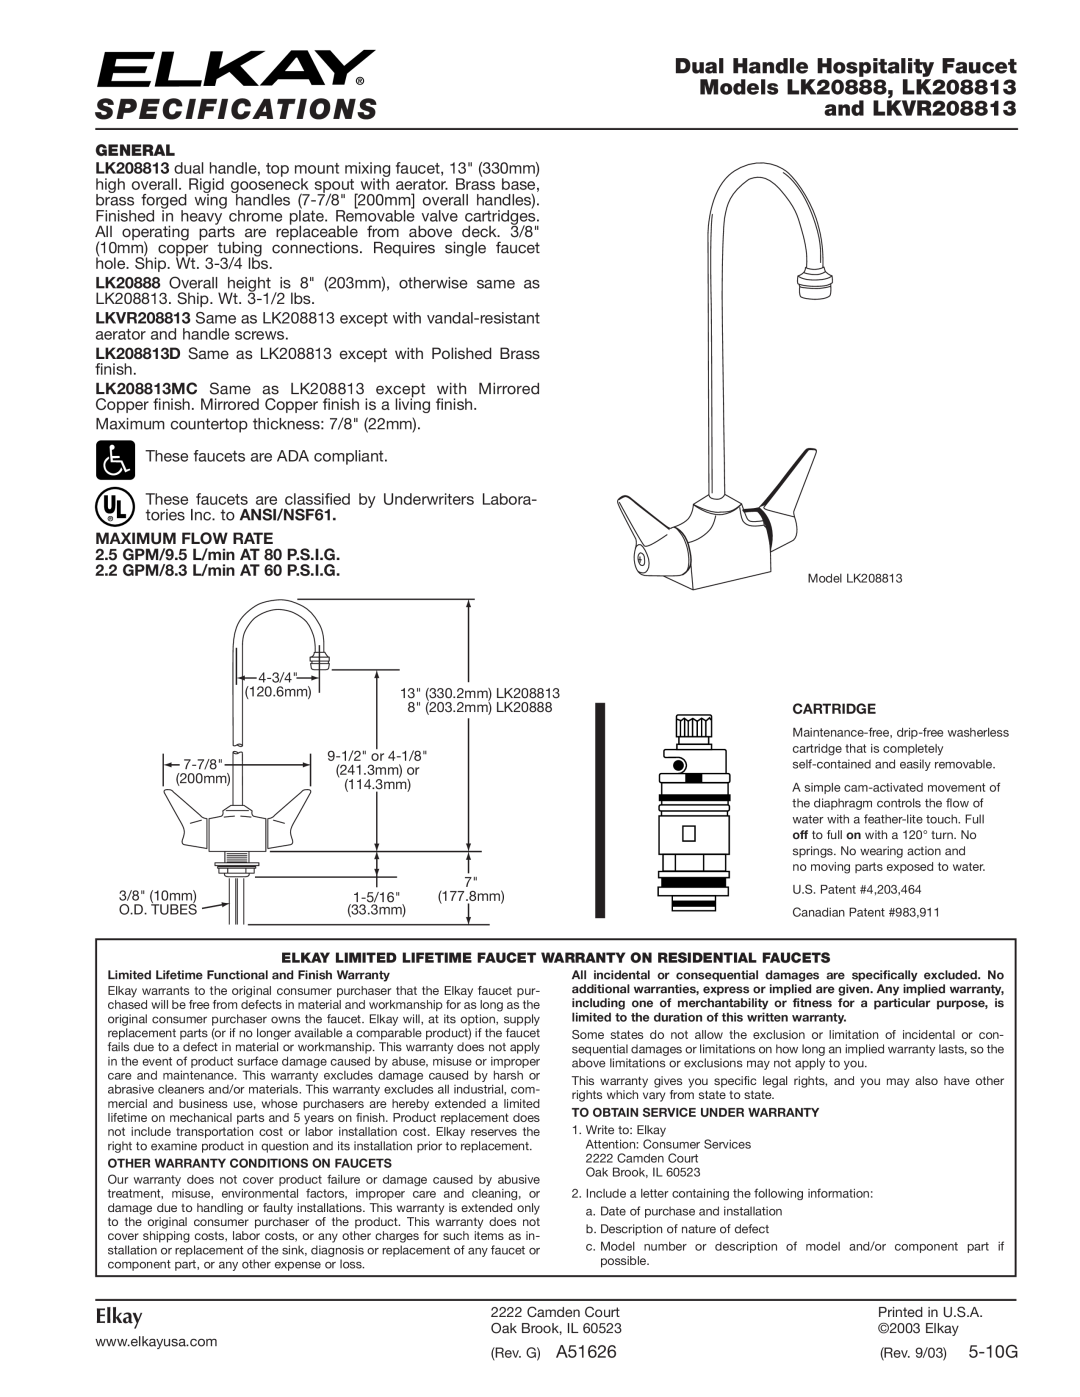 Elkay specifications Specifications, Dual Handle Hospitality Faucet, Models LK20888, LK208813, and LKVR208813, Elkay 